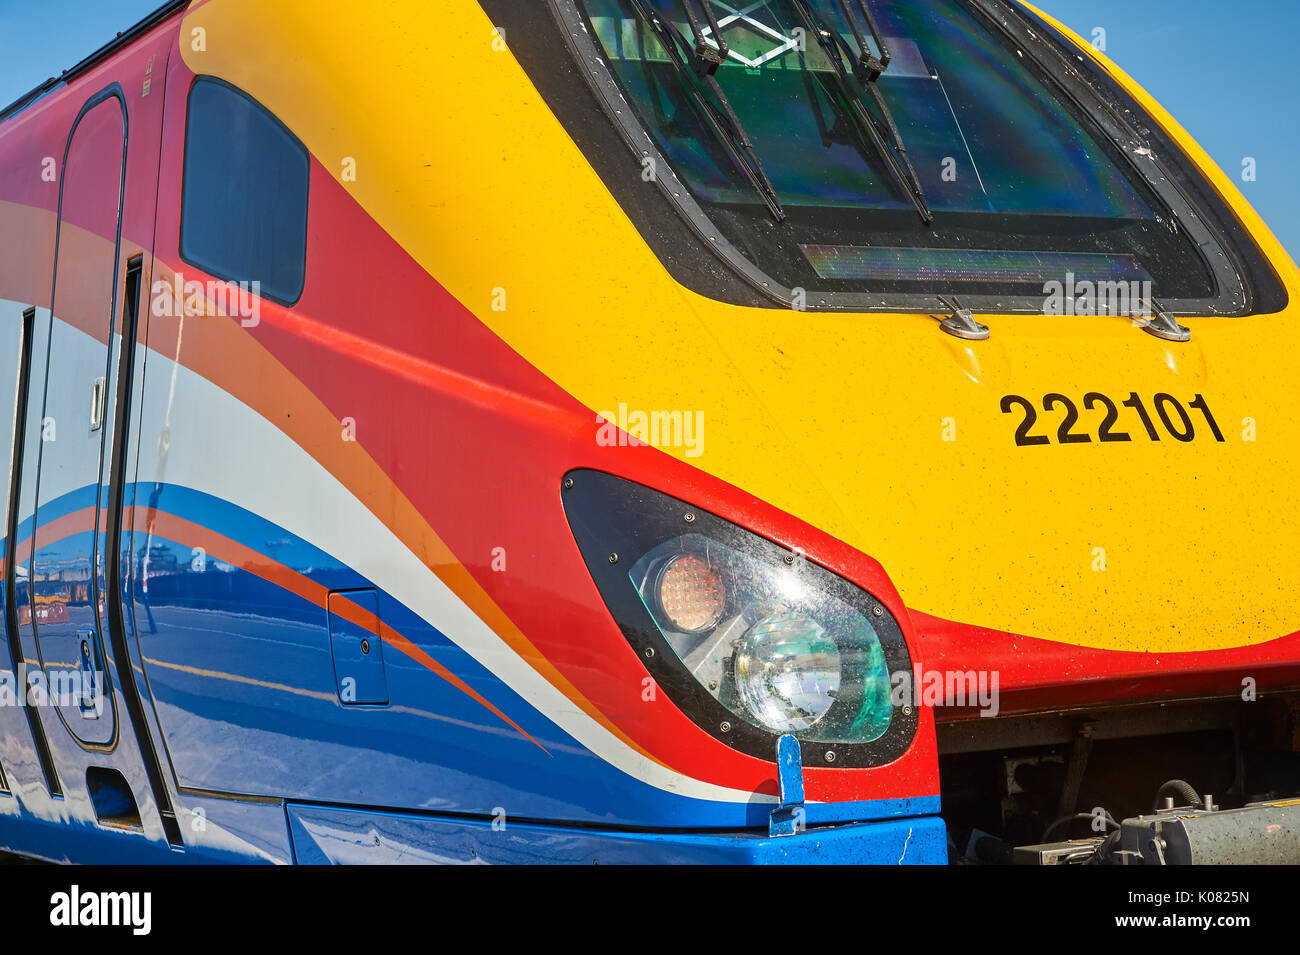 Driver cab of a class 222 passenger train operated by East Midlands trains Stock Photo